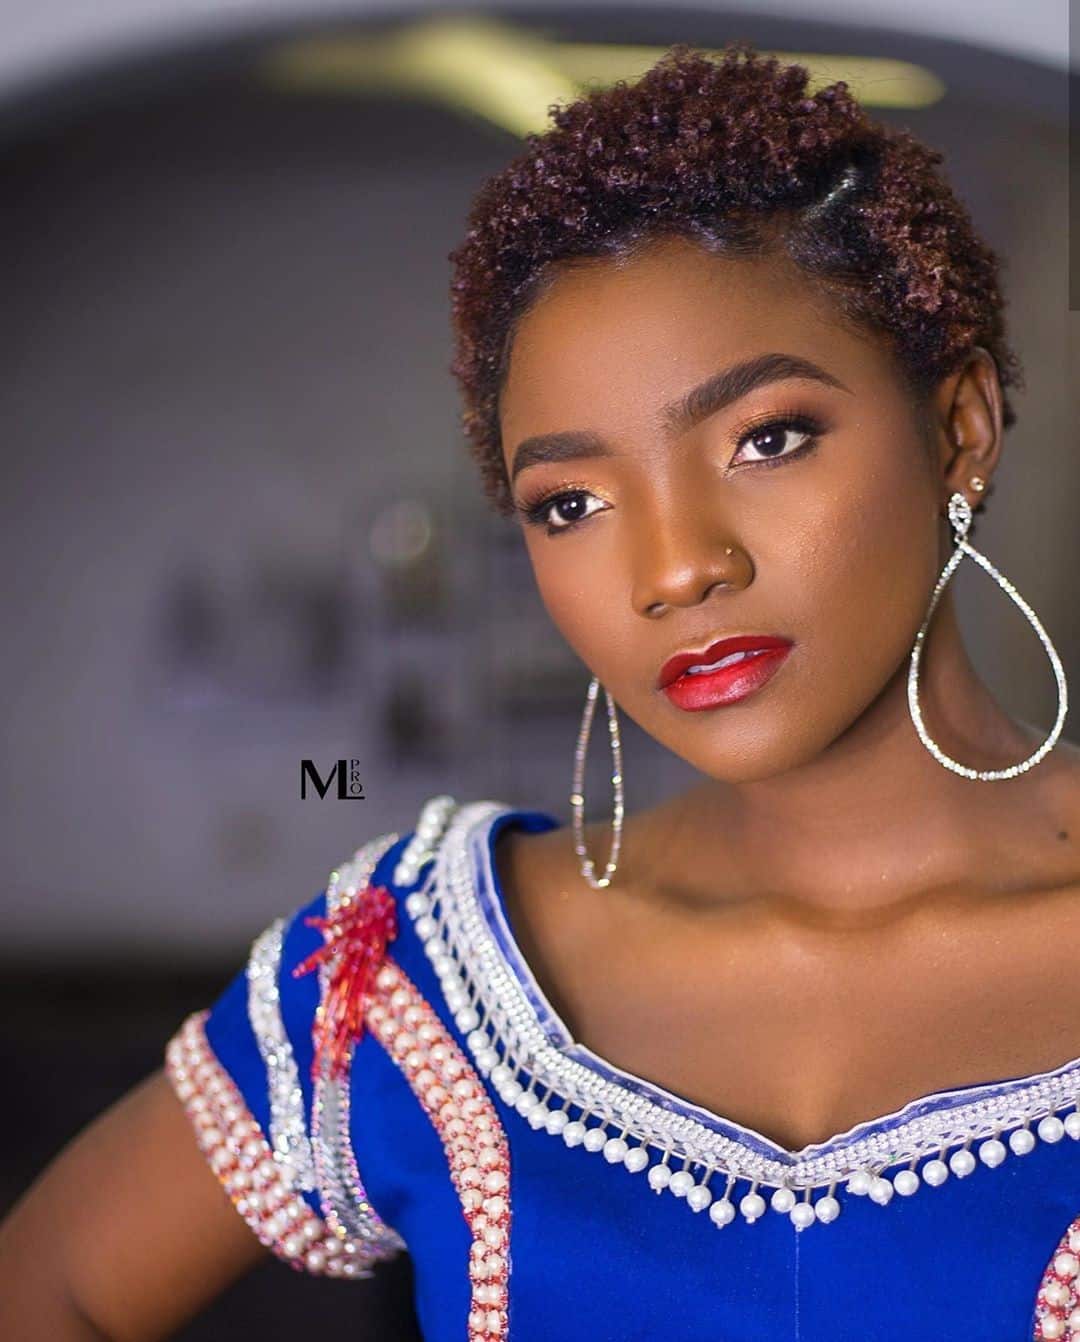 Simi Excited As Her Song 'Duduke' Hits 2 Million Views On YouTube (Video)